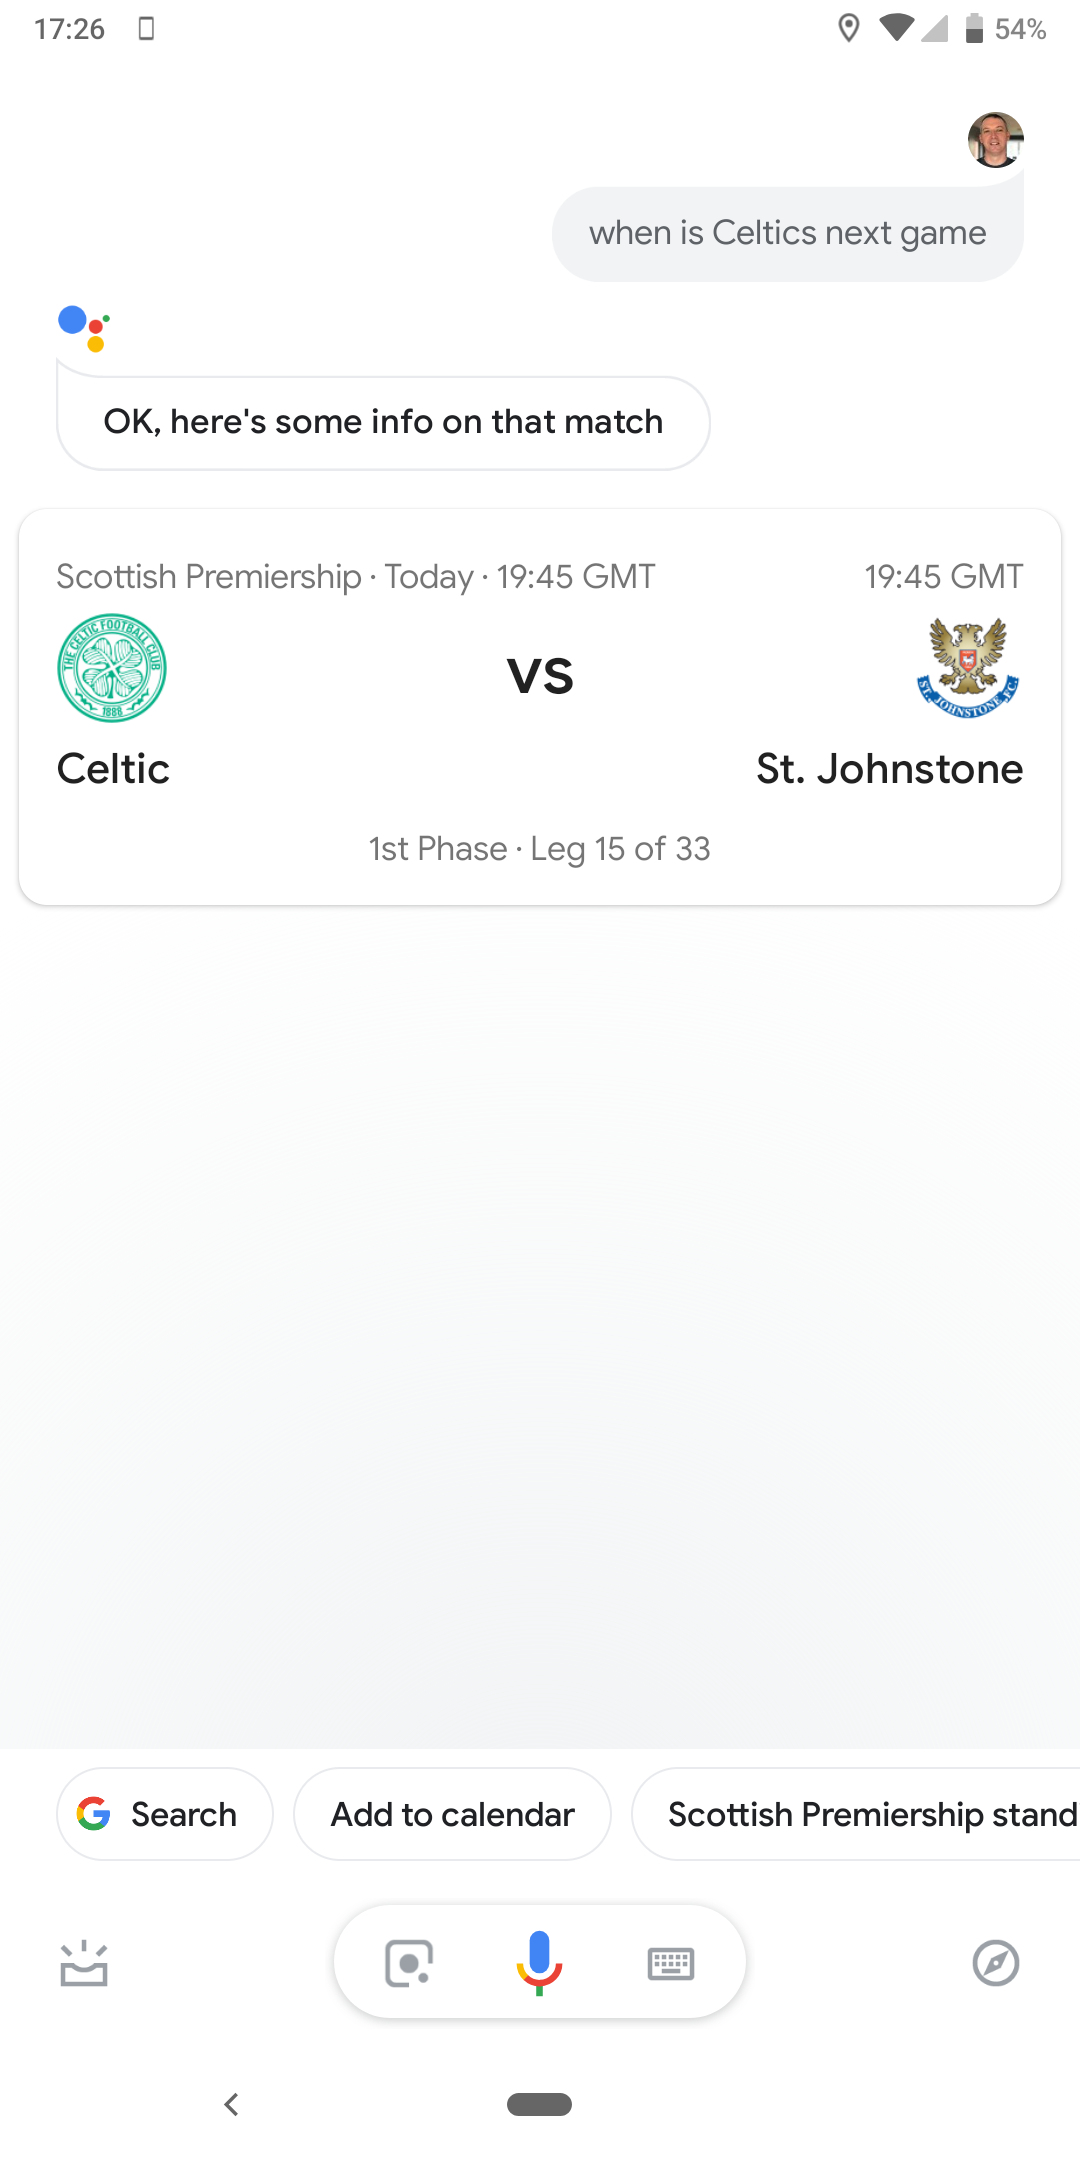 ok, google when is celtic's next game?